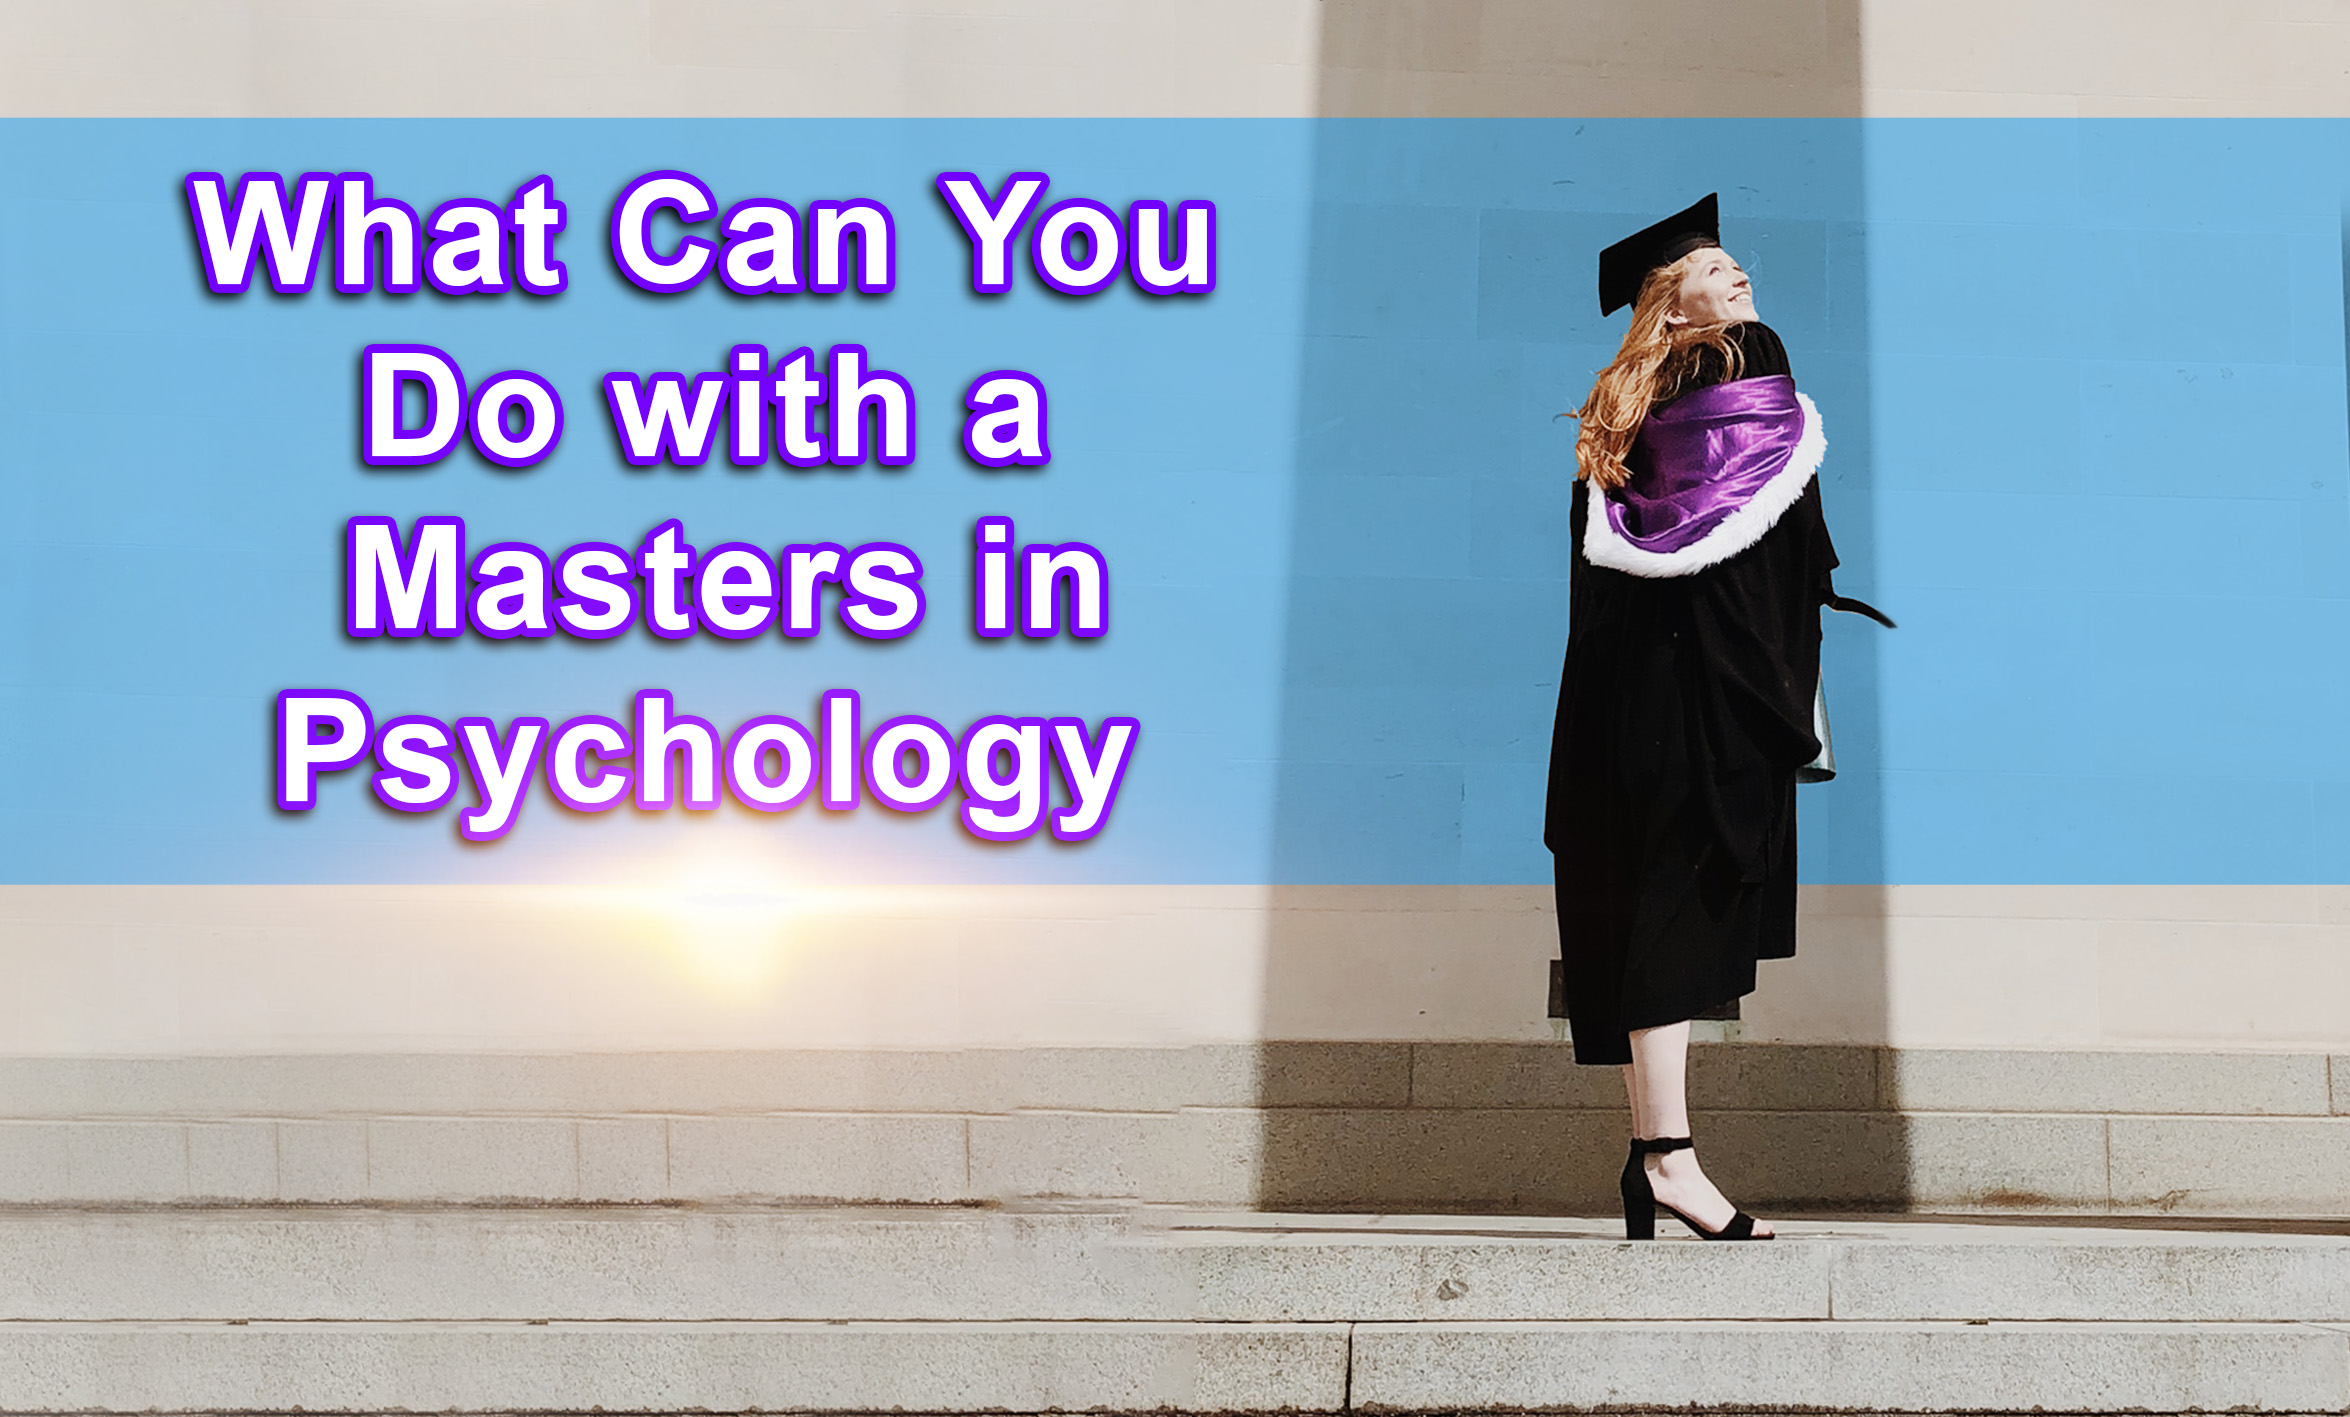 What Can You Do with a Masters in Psychology